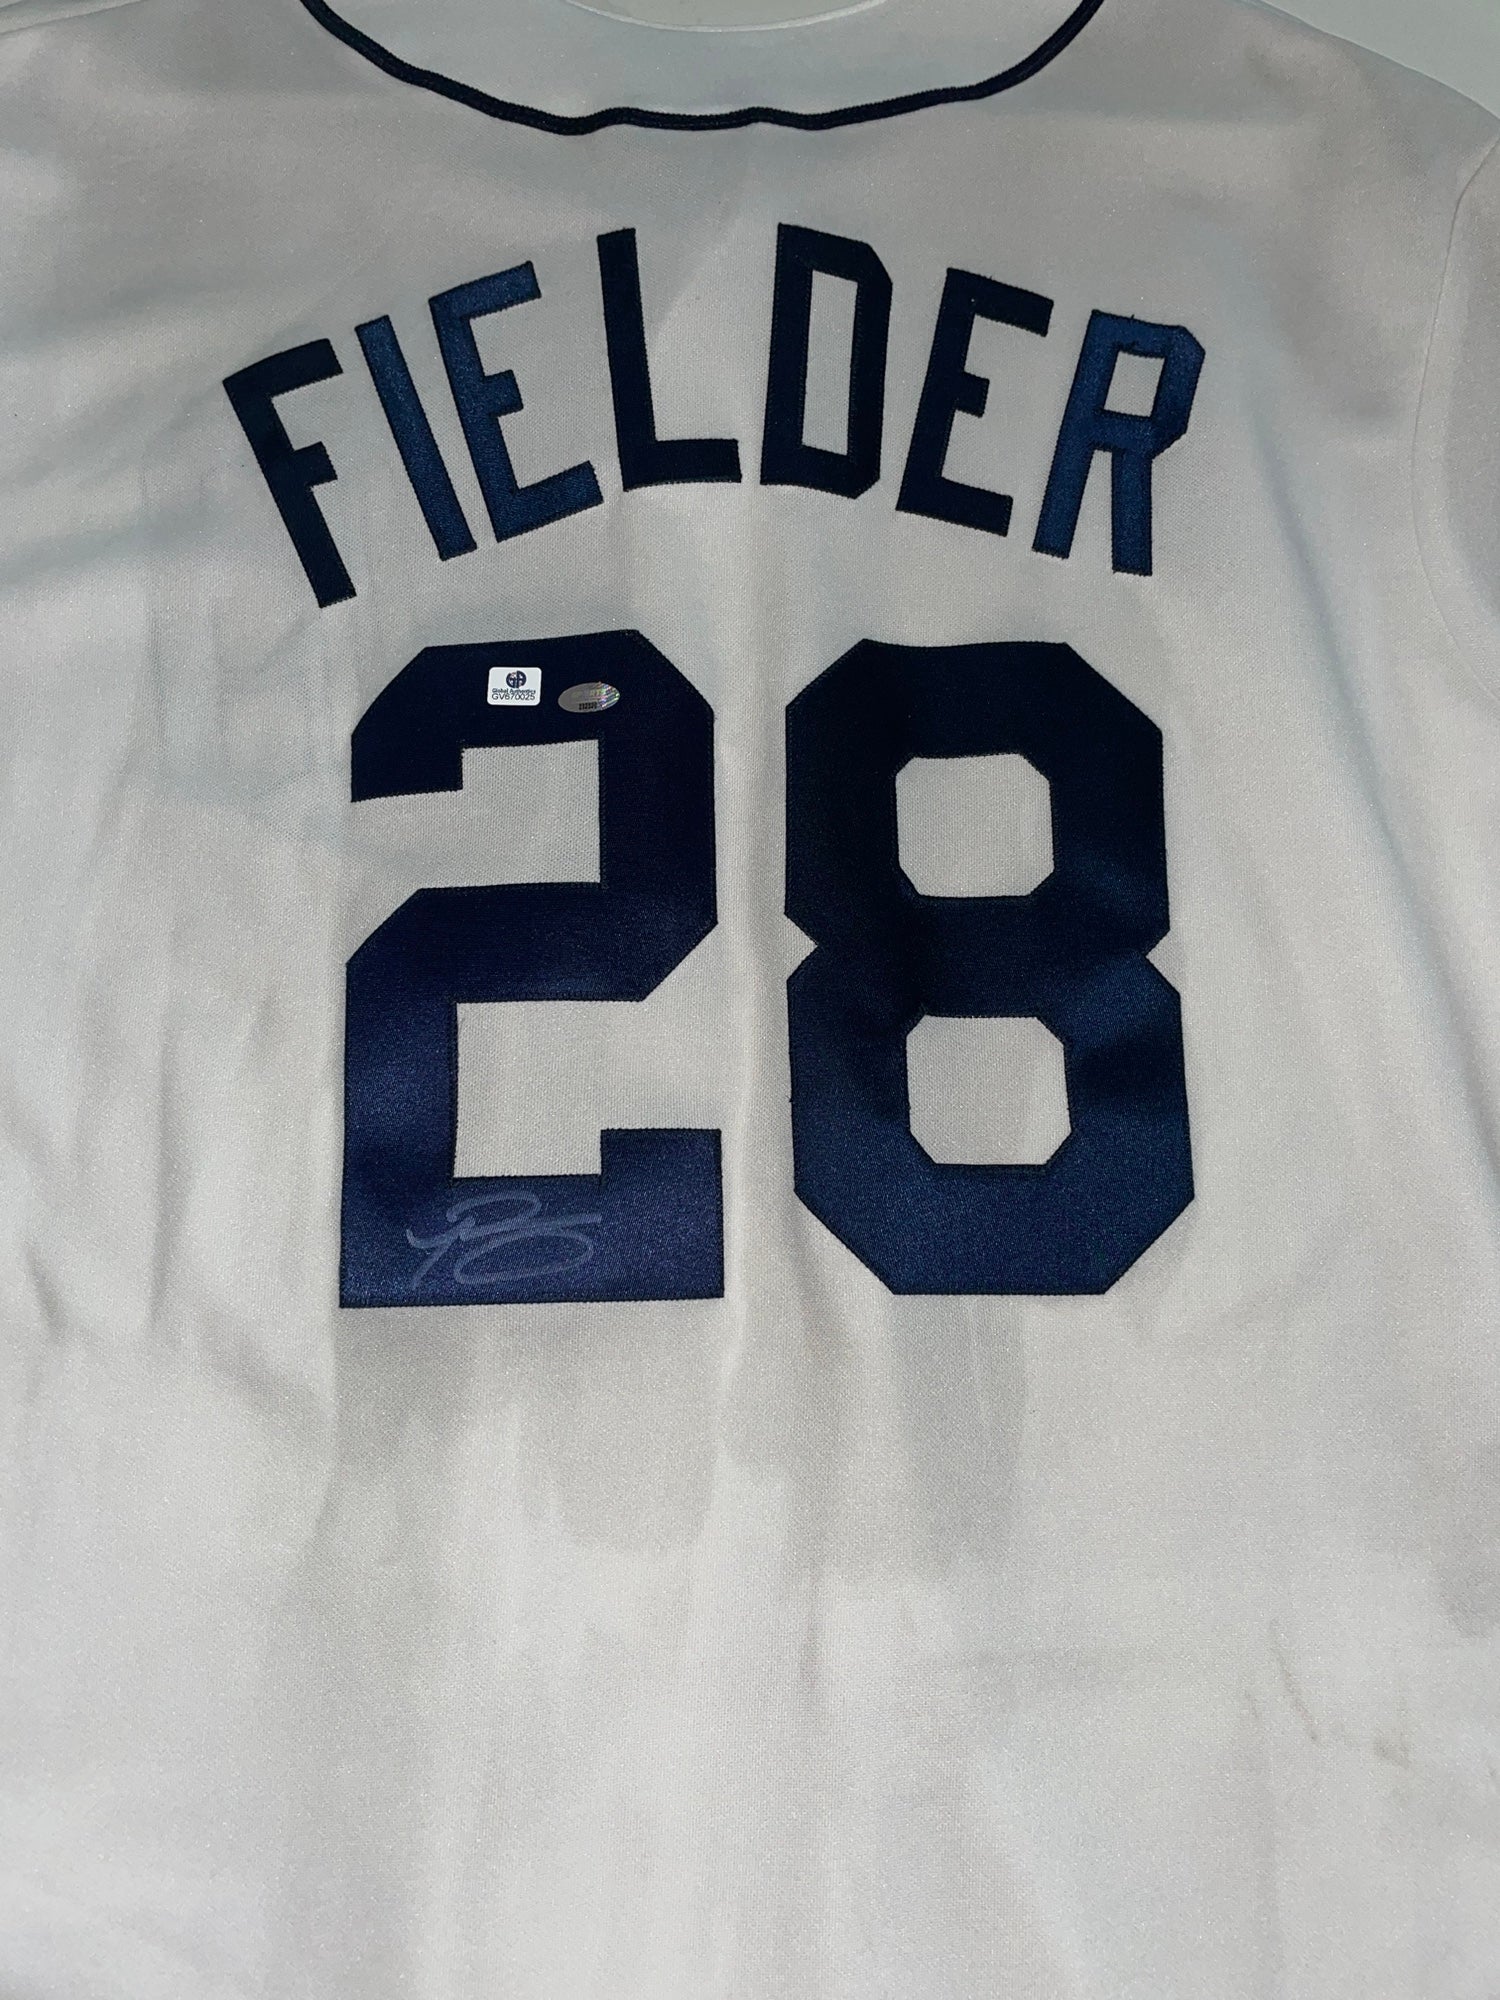 Prince Fielder Autographed Texas Rangers Jersey W/PROOF, Picture of Prince  Signing For Us, PSA/DNA Authenticated, Texas Rangers, Milwaukee Brewers,  Detroit Tigers, Home Run Derby Champion, All Star at 's Sports  Collectibles Store